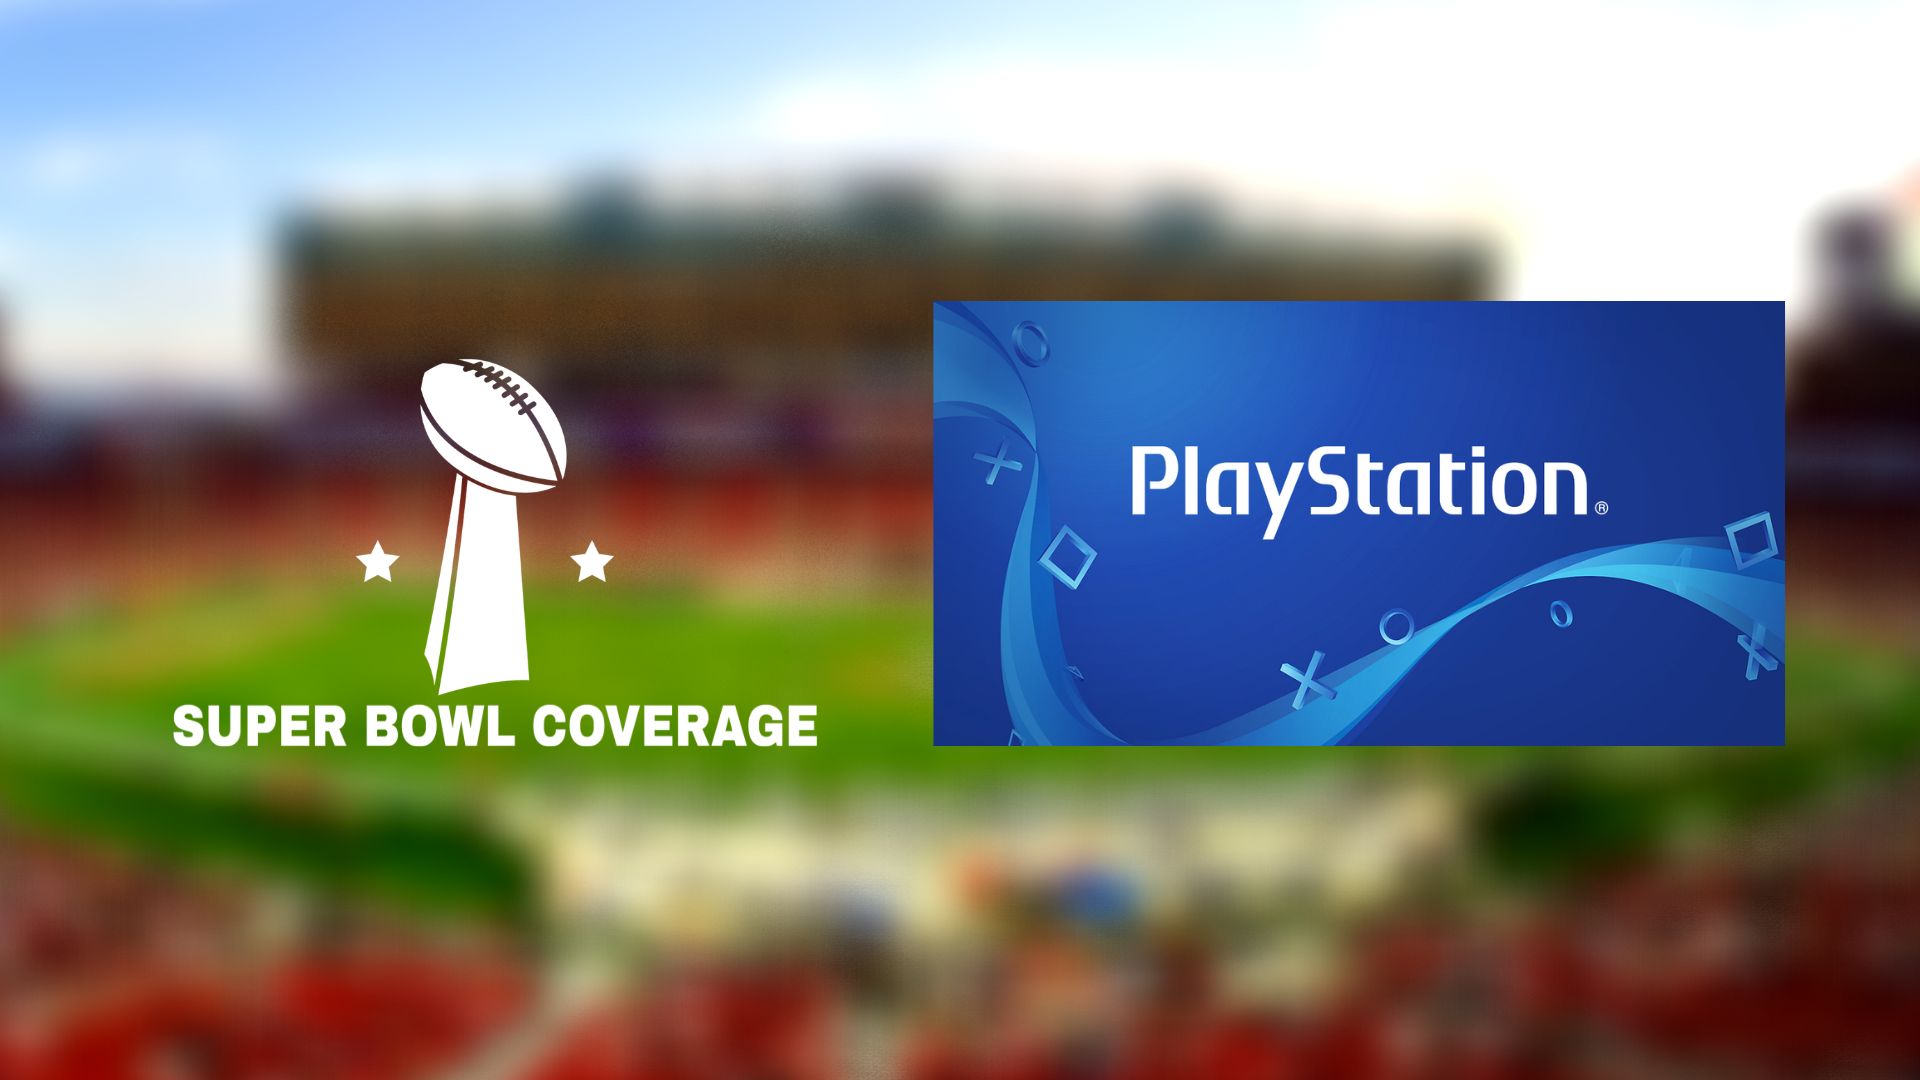 How to Watch Super Bowl on Playstation